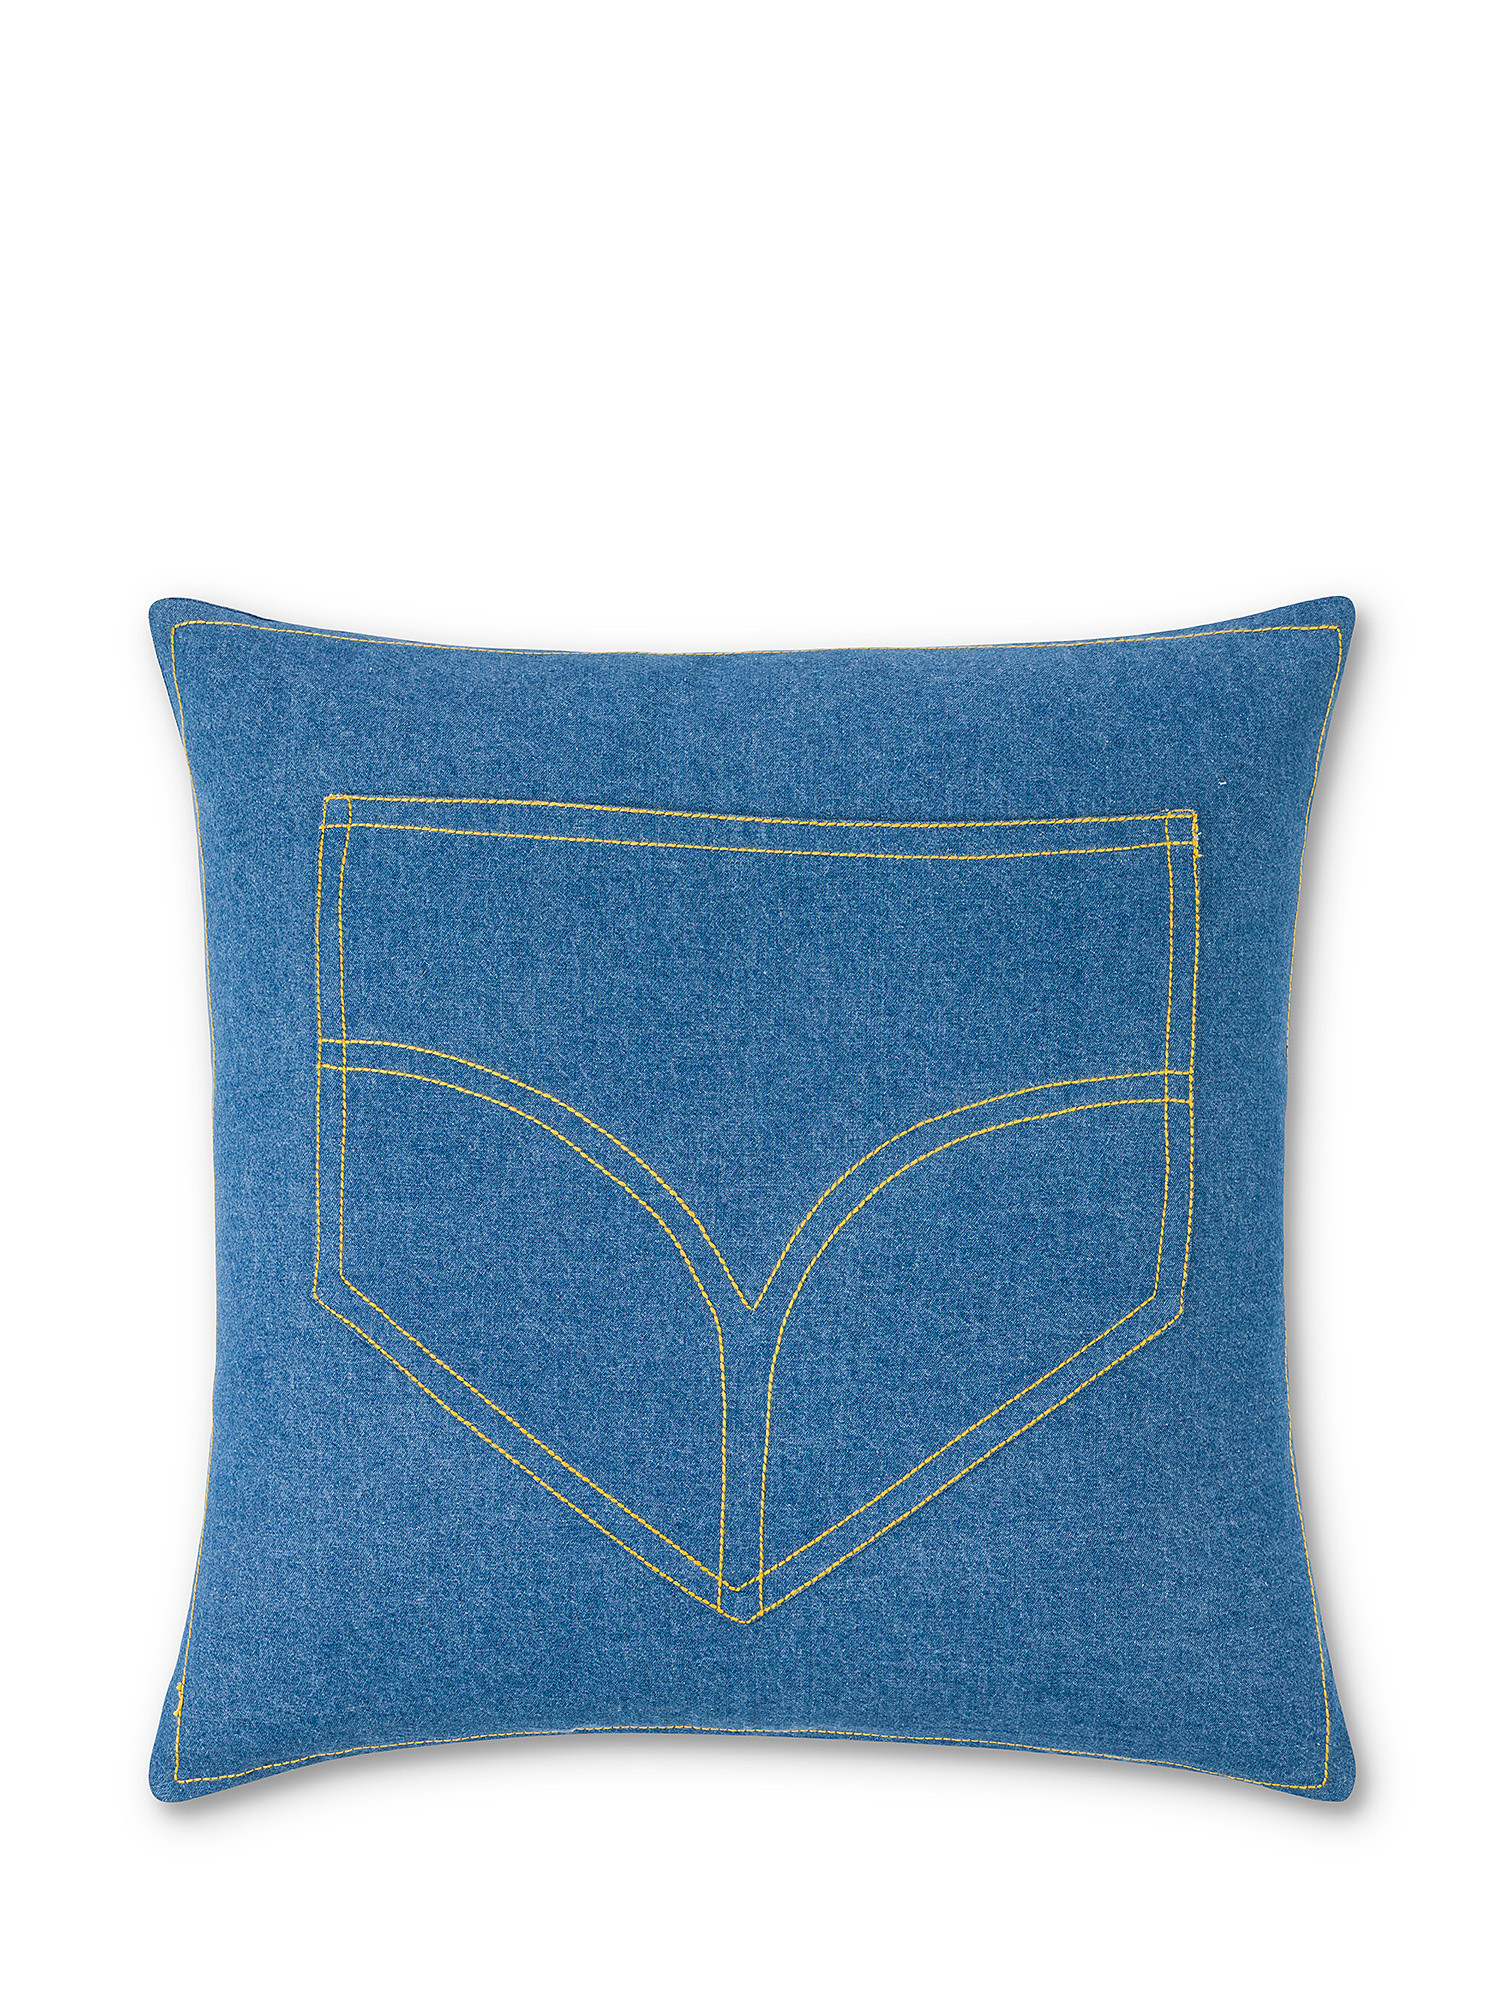 Cotton denim cushion with pocket embroidery 45x45cm, Light Blue, large image number 0